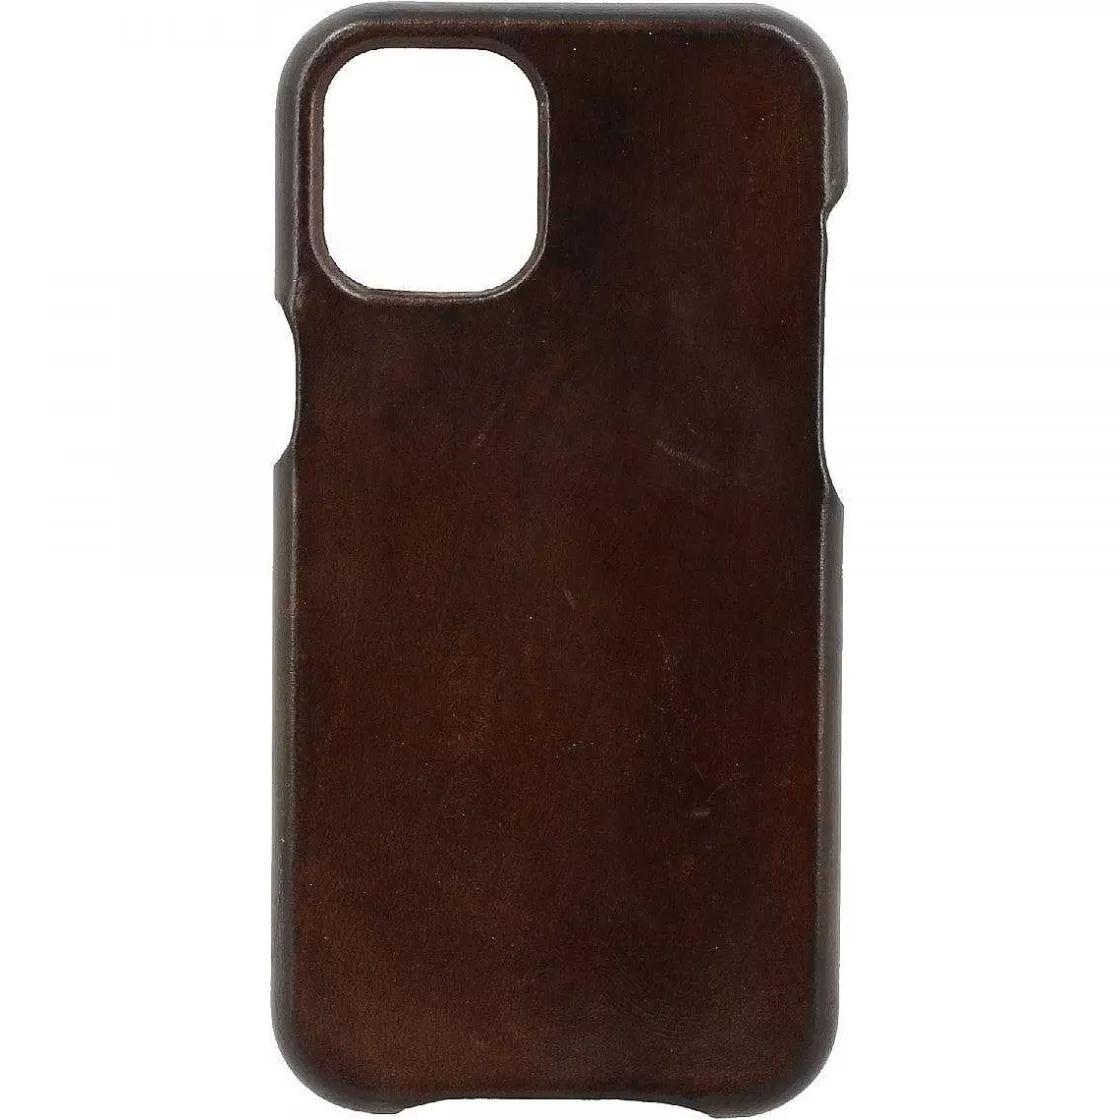 Leonardo Iphone Cover In Hand-Buffered Dark Brown Leather Outlet